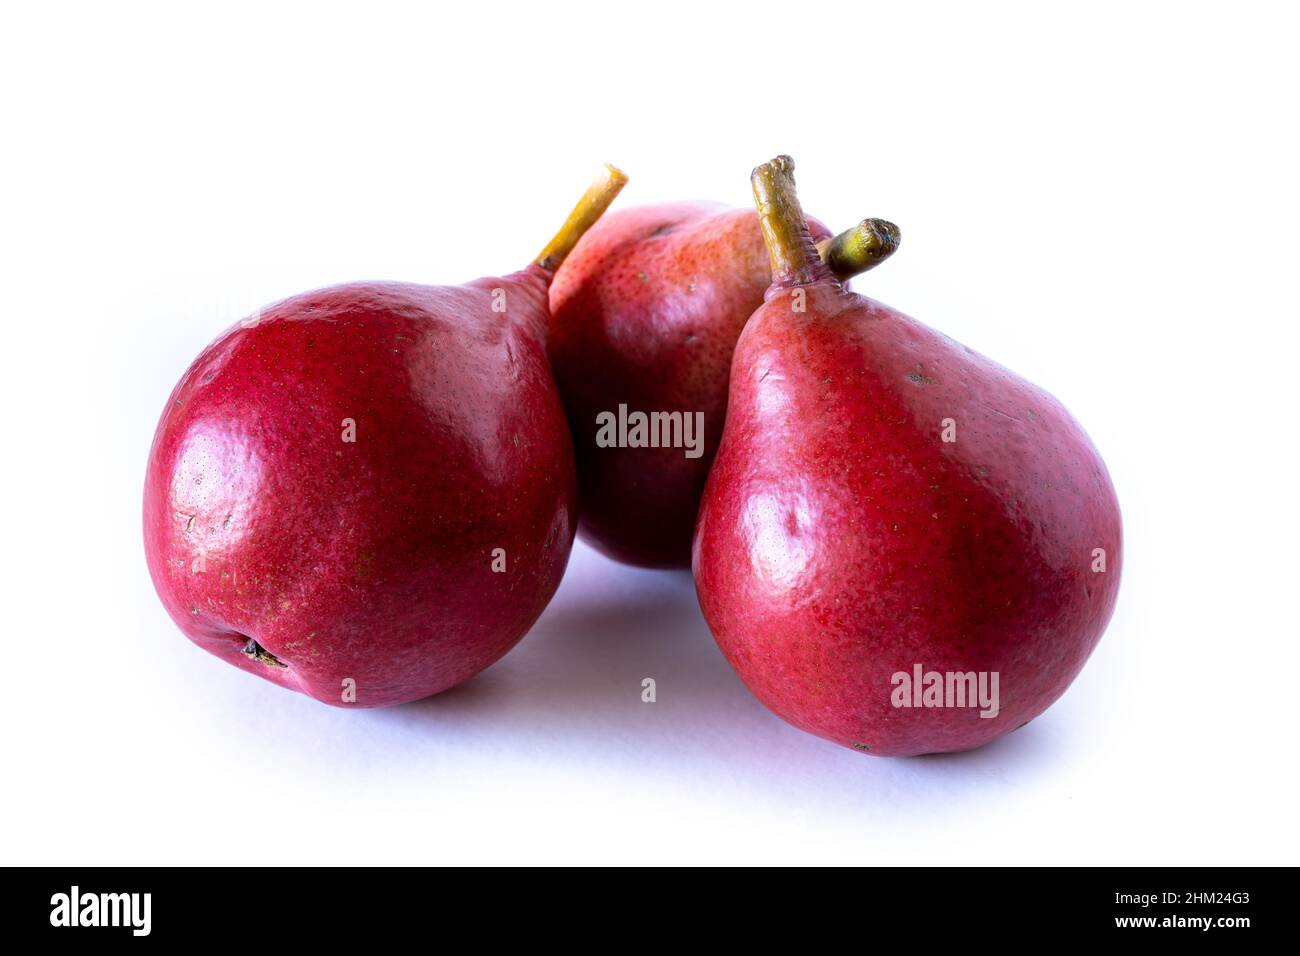 Three delicious red or red battler pears isolated on white background. Organic and natural products, healthy and wholesome food. Stock Photo